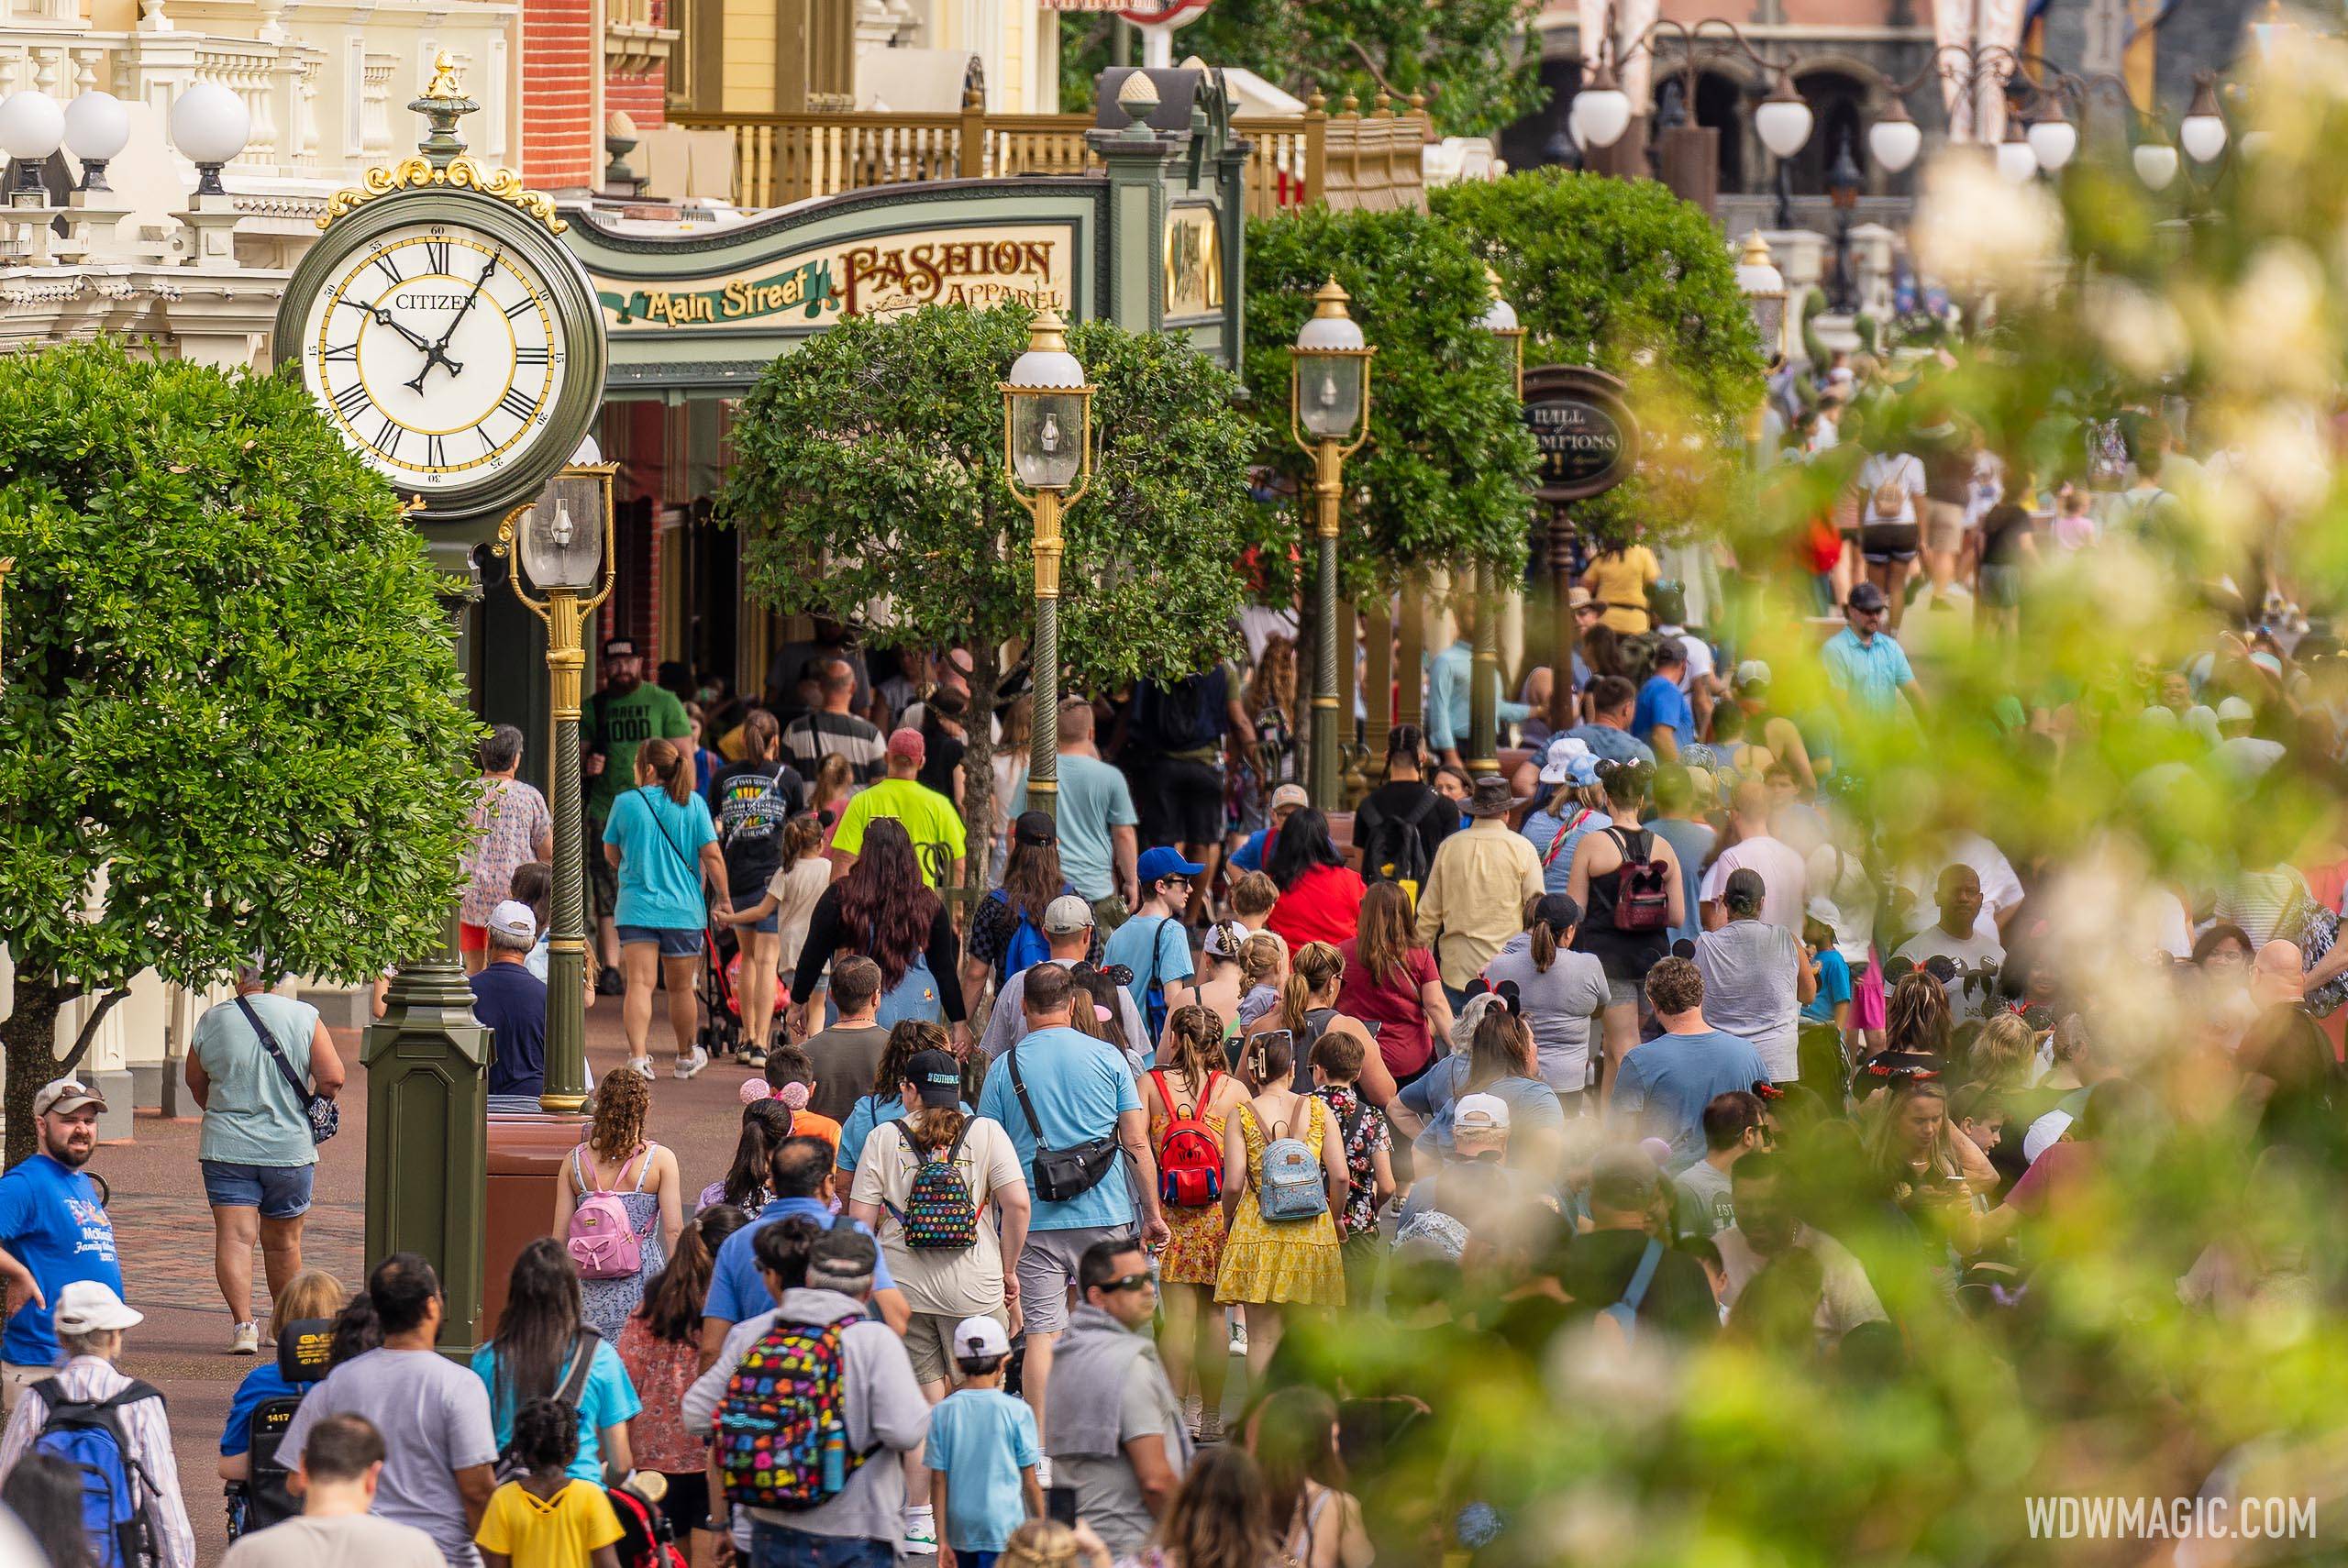 Operating hours extended at all four Walt Disney World theme parks for the first week of 2021